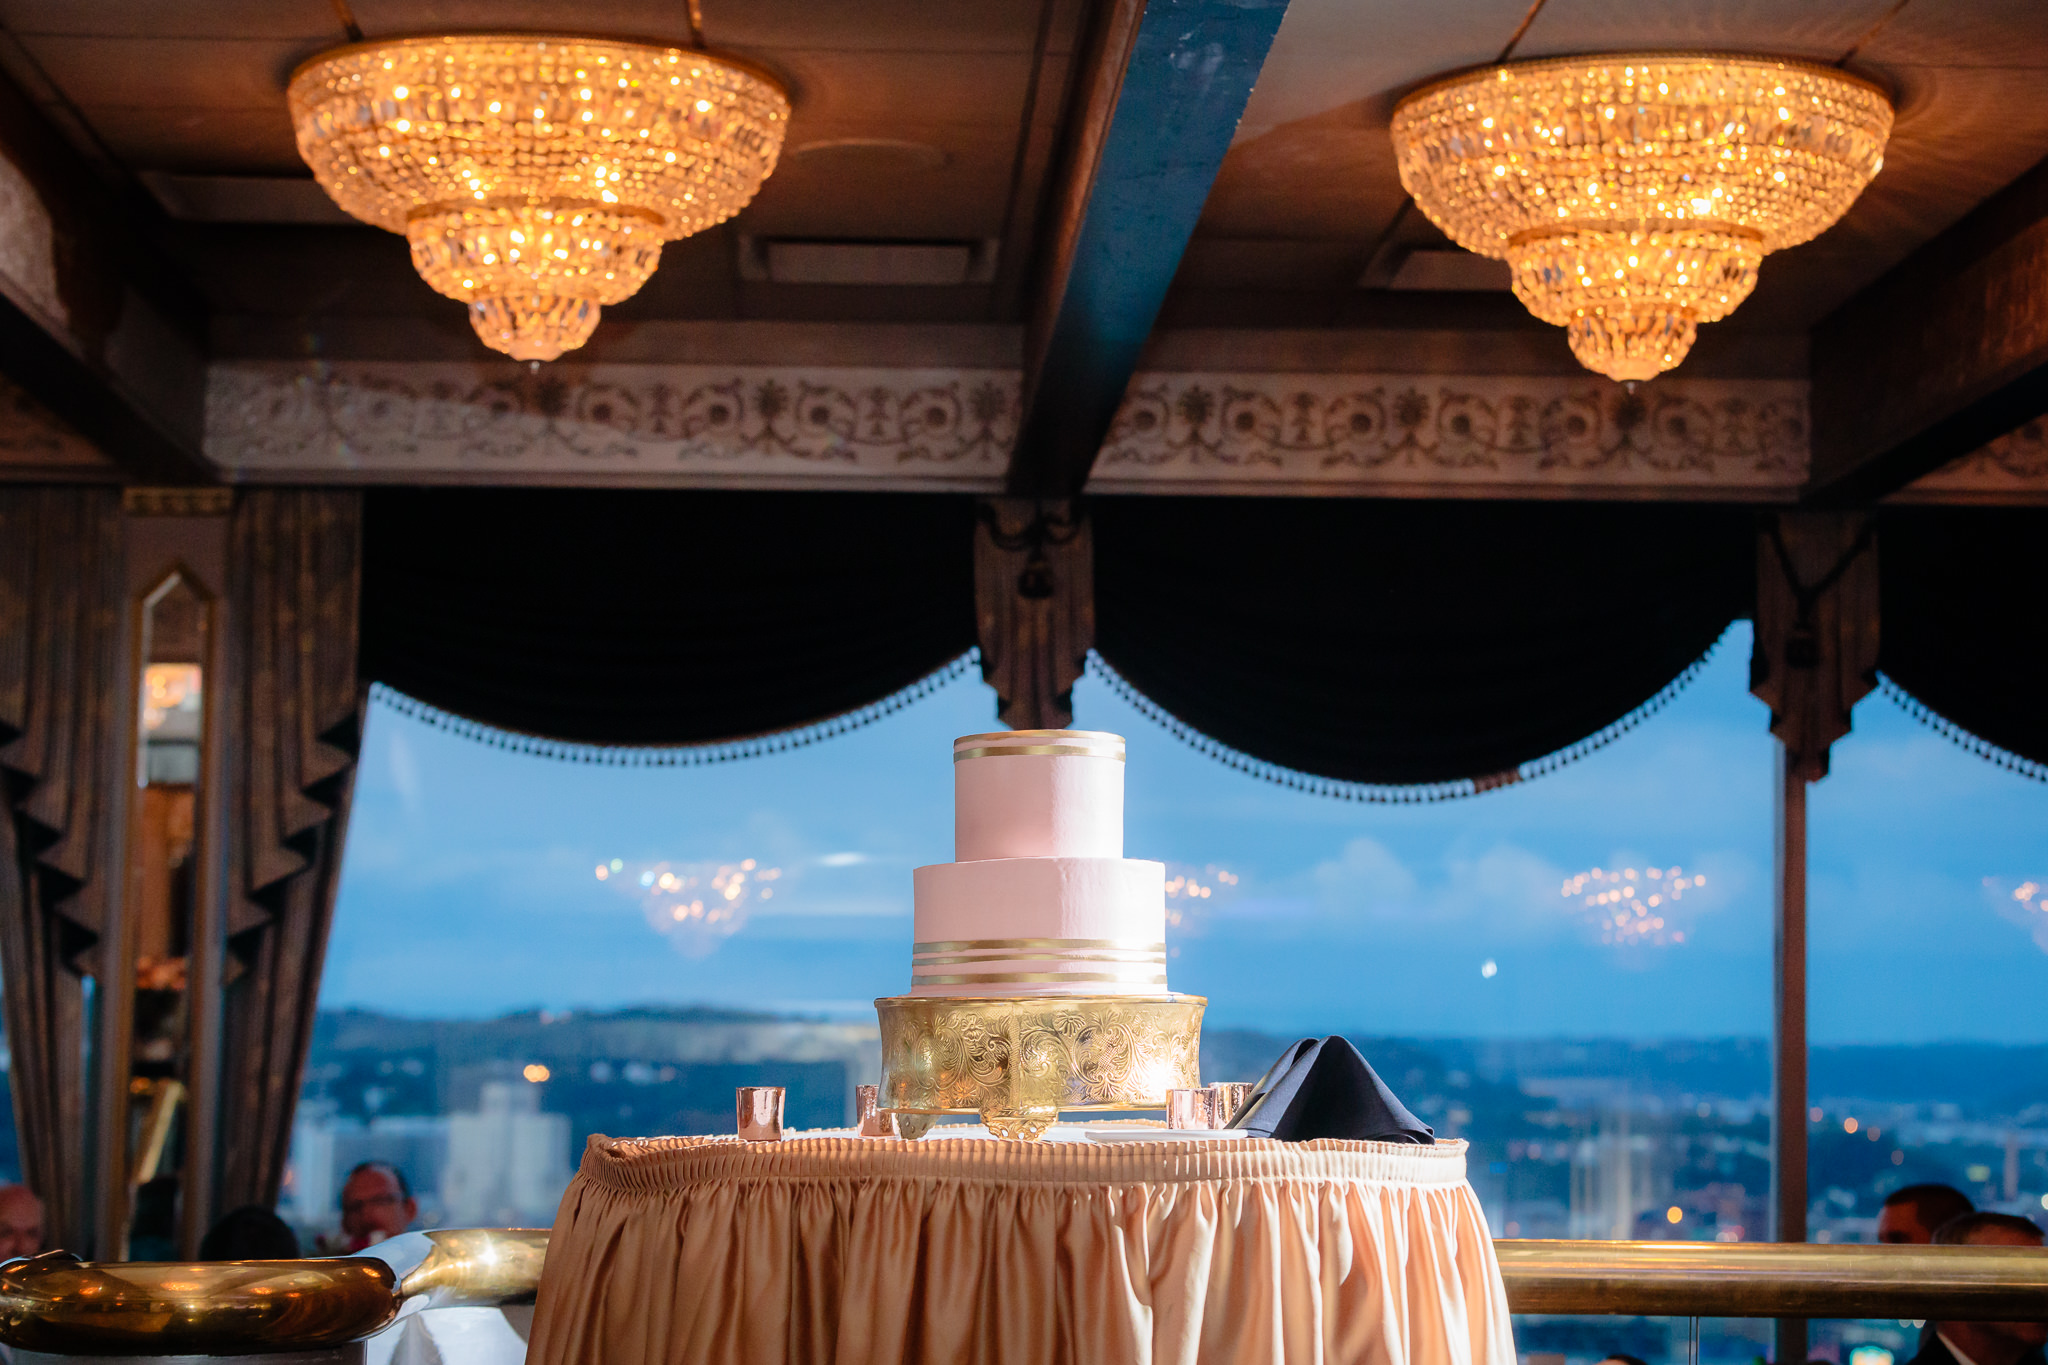 Wedding cake by Oakmont Bakery sits under crystal chandeliers at the LeMont